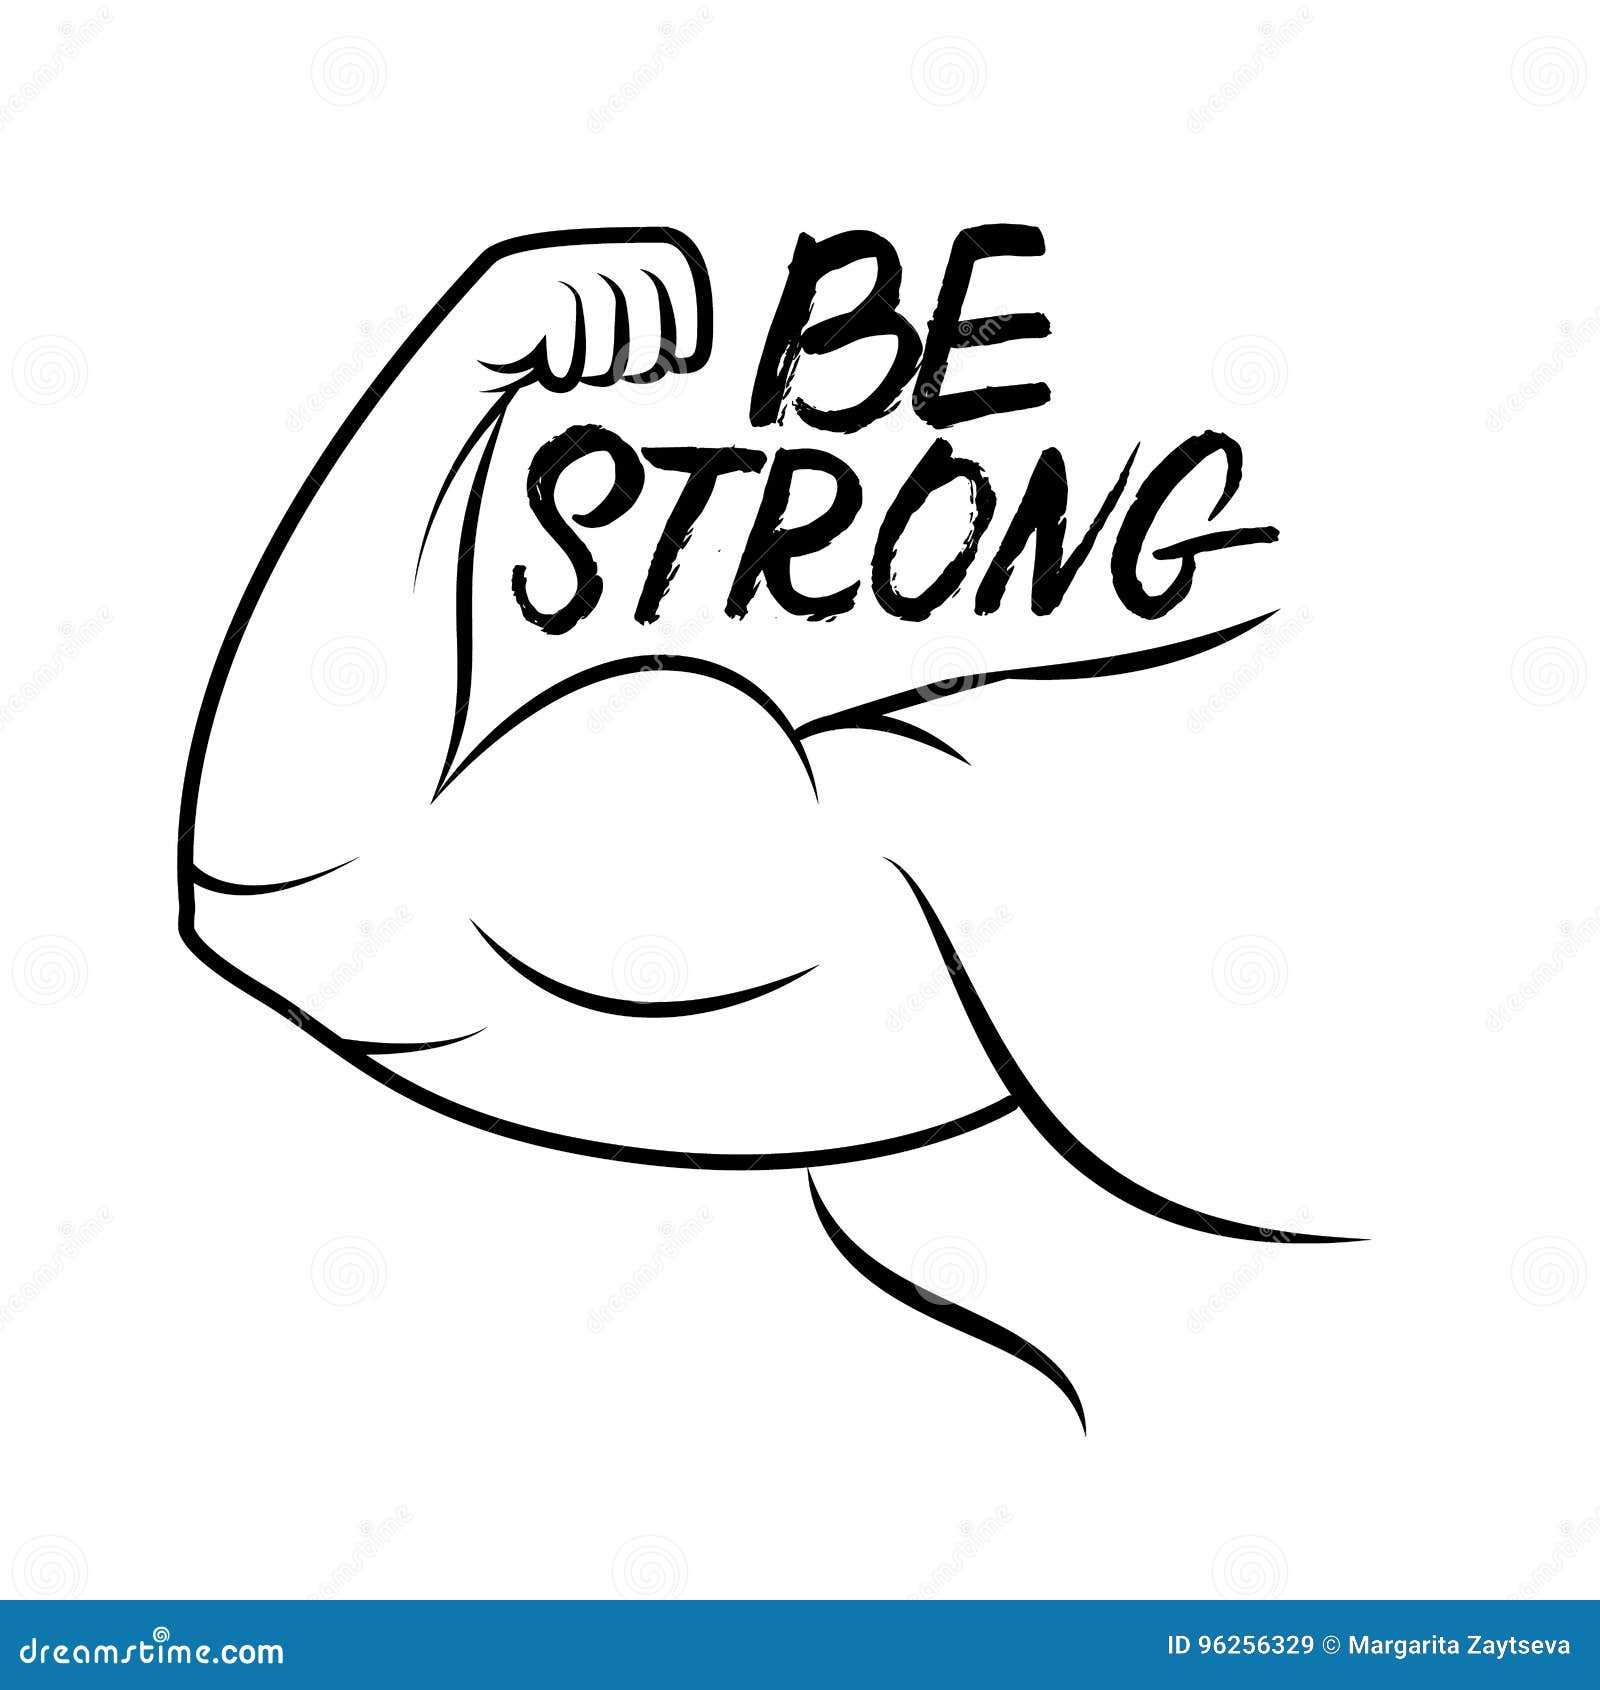 https://thumbs.dreamstime.com/z/strong-arm-icon-line-art-bodybuilder-muscle-power-be-hand-written-lettering-inspirational-quote-vector-illustration-96256329.jpg